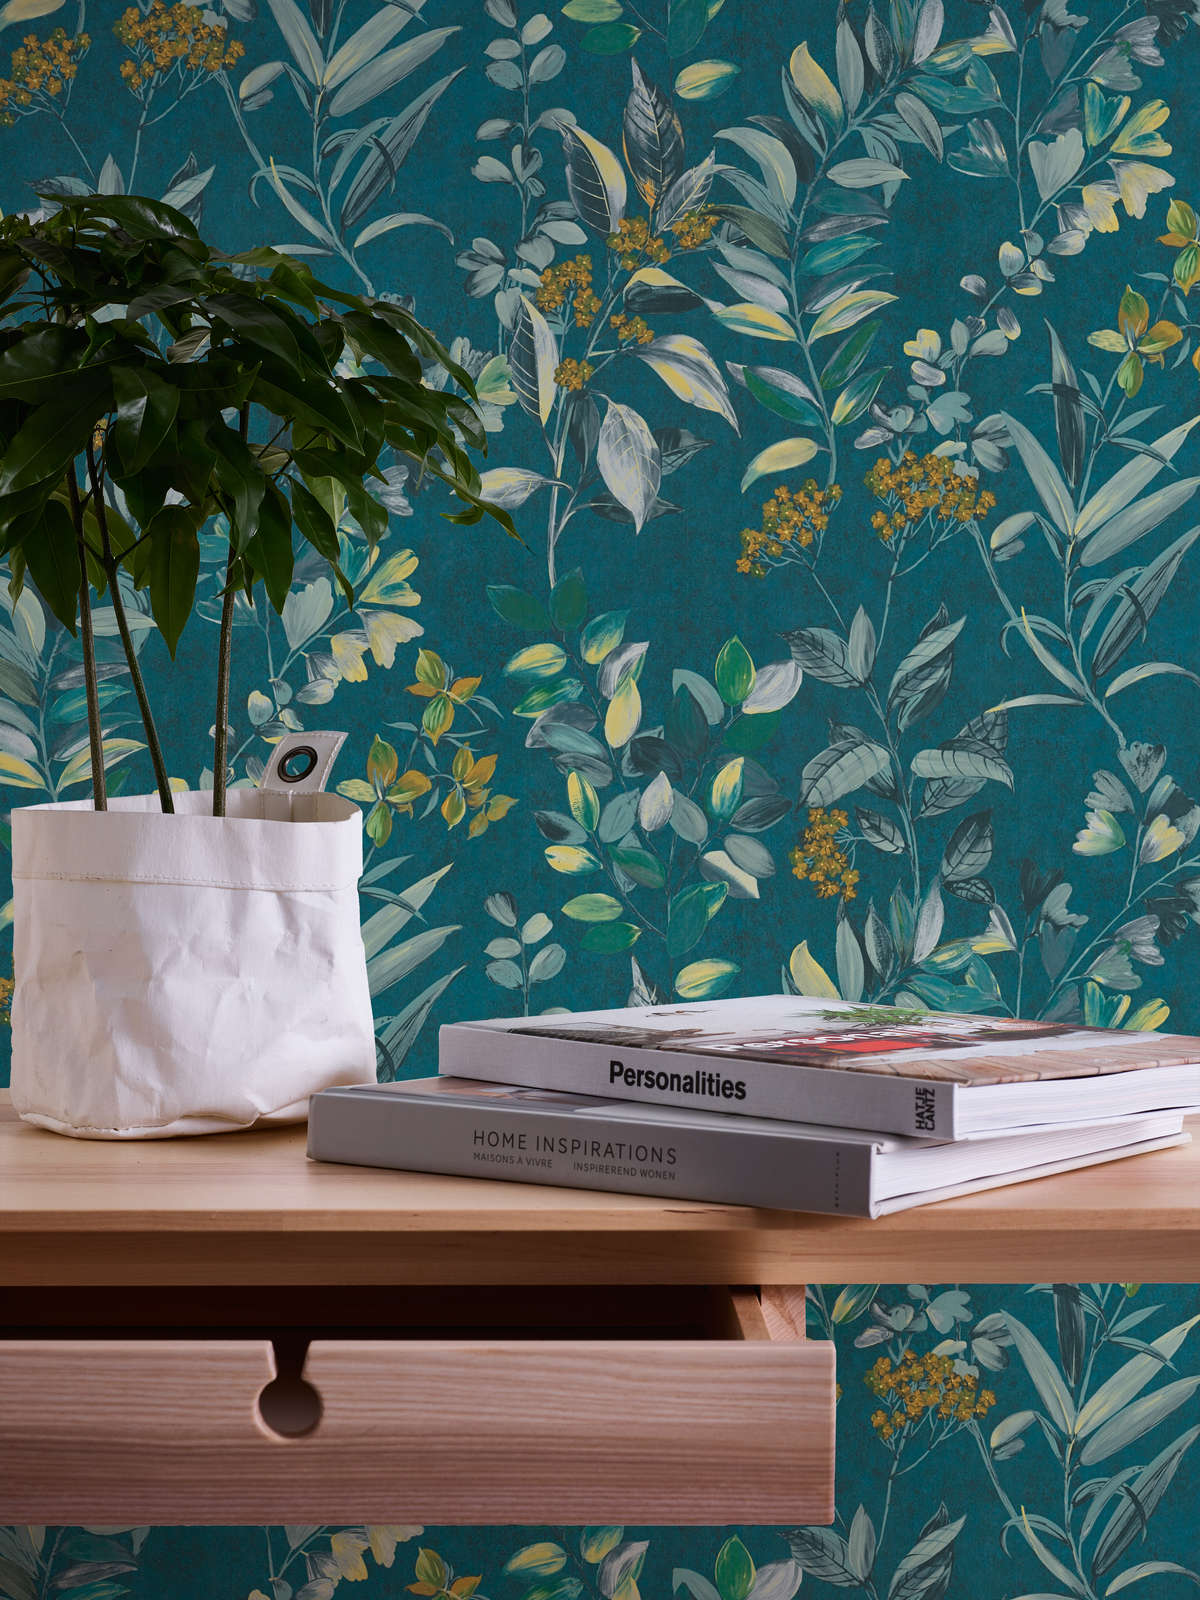             Floral non-woven wallpaper with floral pattern - multicoloured, petrol, yellow
        